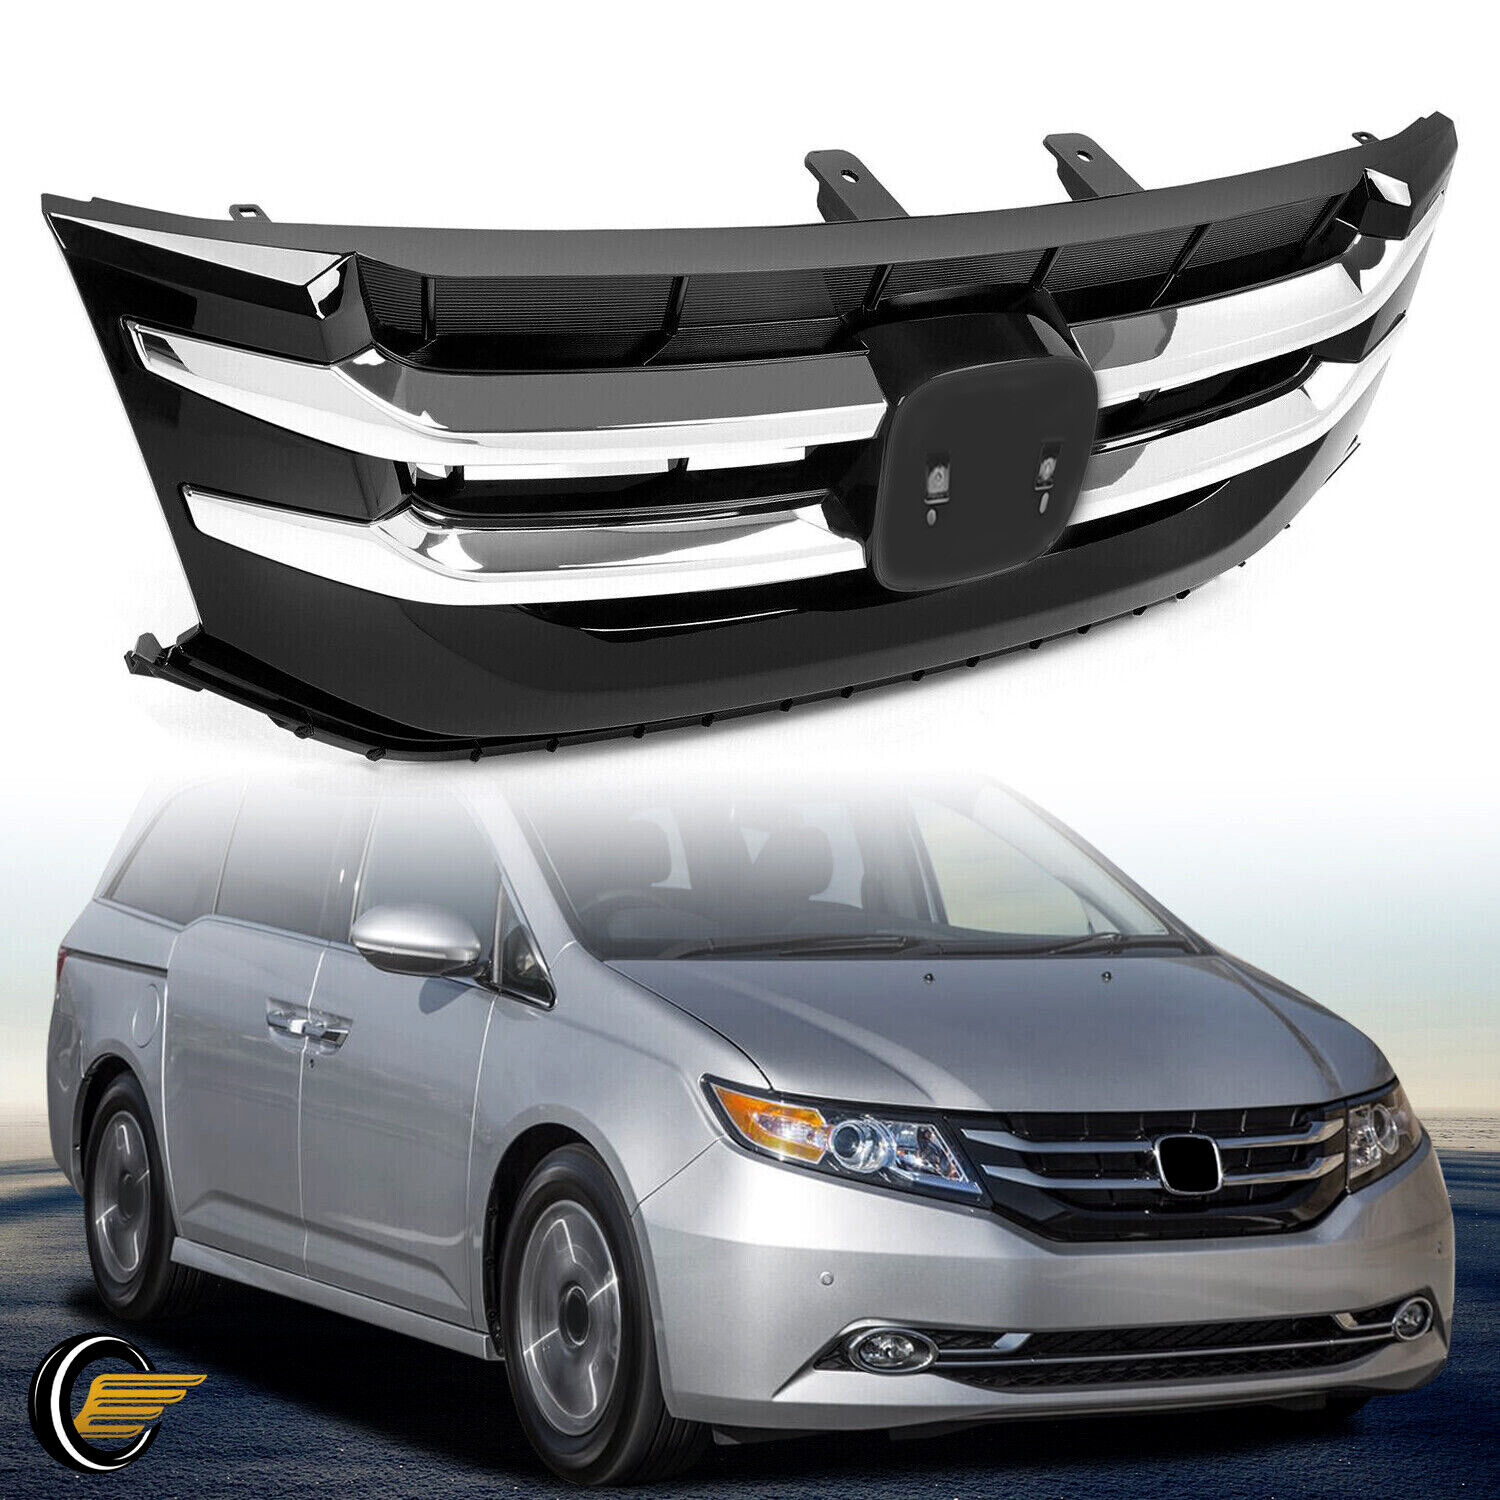 Bumper Grille Assembly Fits 2014 2015 2016 2017 Honda Odyssey Front Chrome Grill